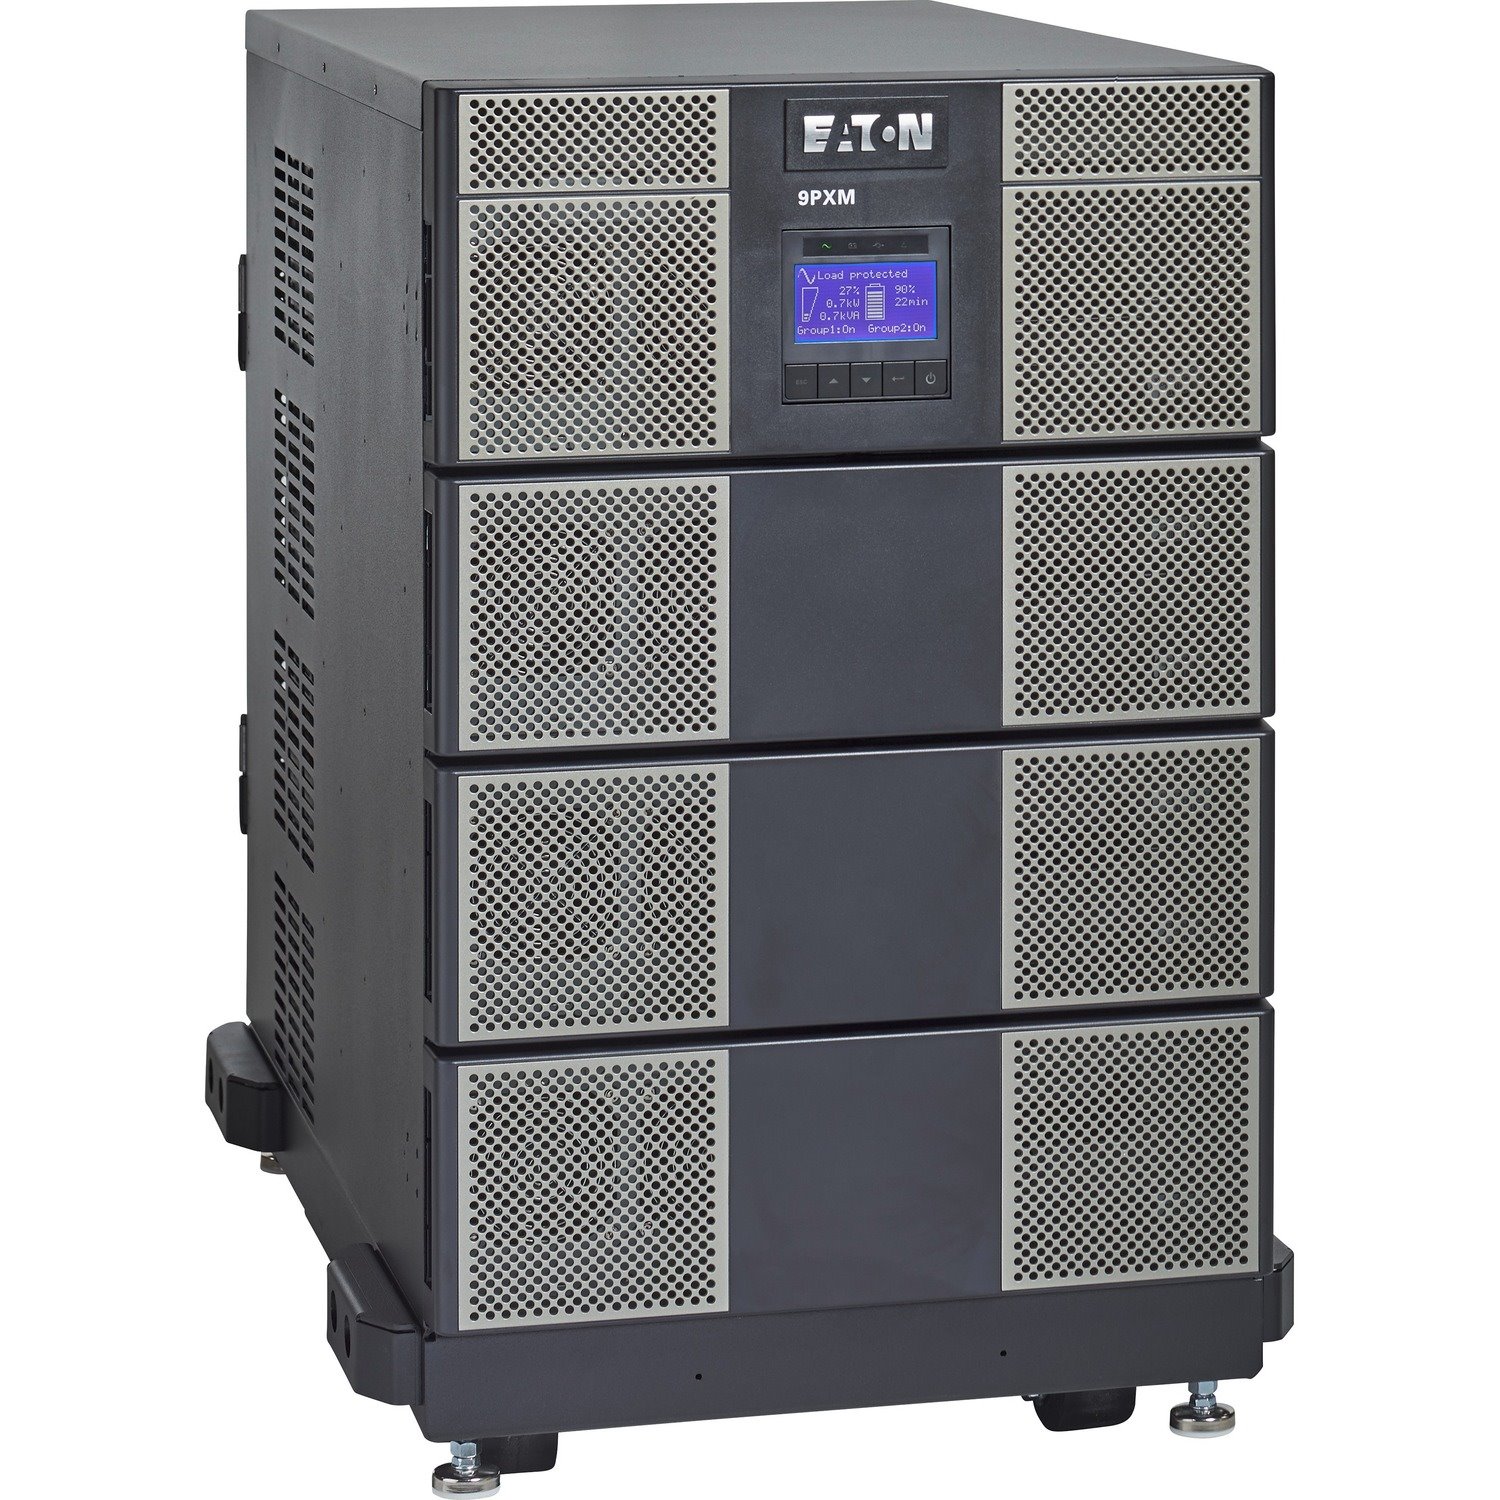 Eaton 9PXM 12kVA 10.8kW 208-240V N+1 Modular Scalable Online Double-Conversion UPS, Hardwired Input / Output, Cybersecure Network Card Included, 14U, TAA - Battery Backup